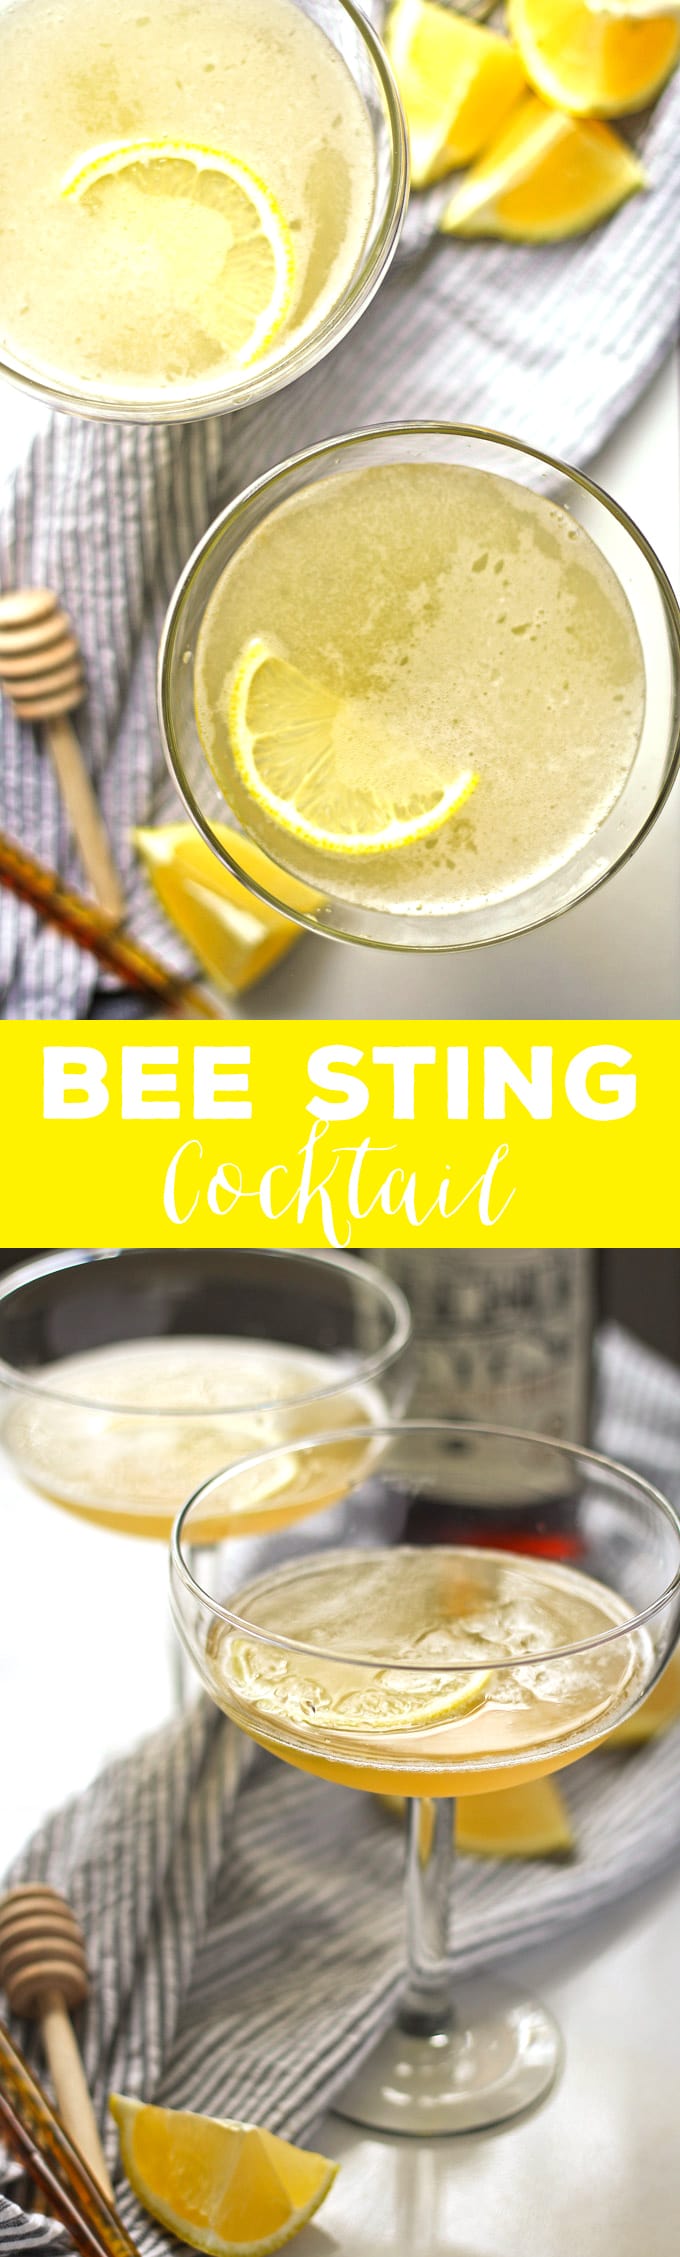 The bee sting cocktail is a spicy riff on The Bee's Knees. You'll be adding this easy to make, buzz-worthy drink to your list of favorite cocktails! | honeyandbirch.com